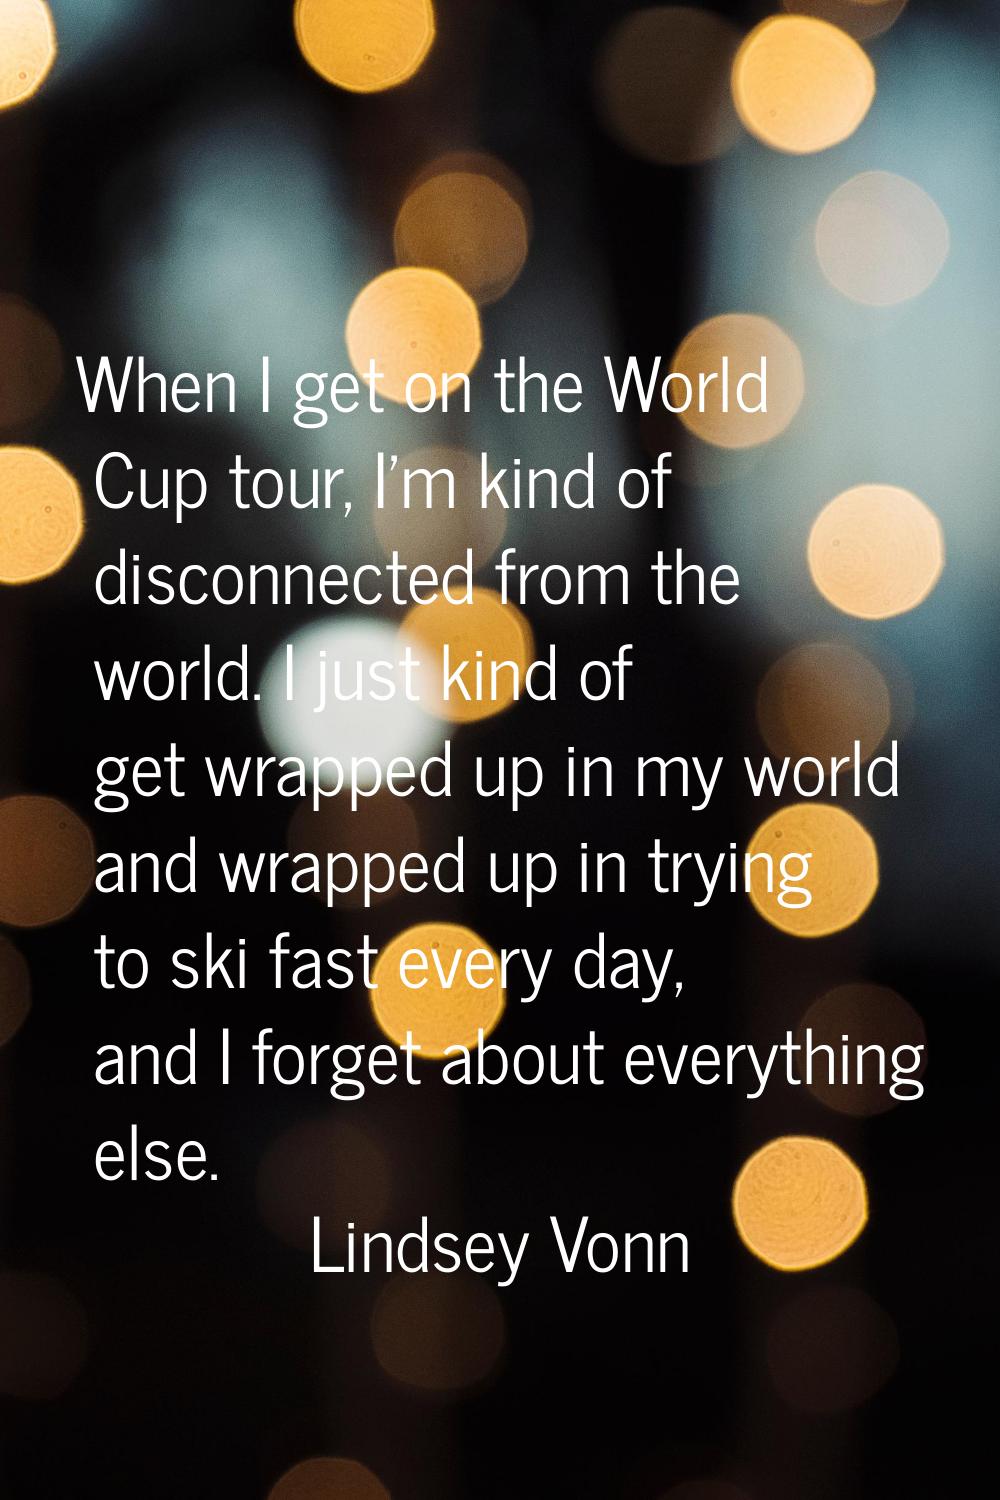 When I get on the World Cup tour, I'm kind of disconnected from the world. I just kind of get wrapp